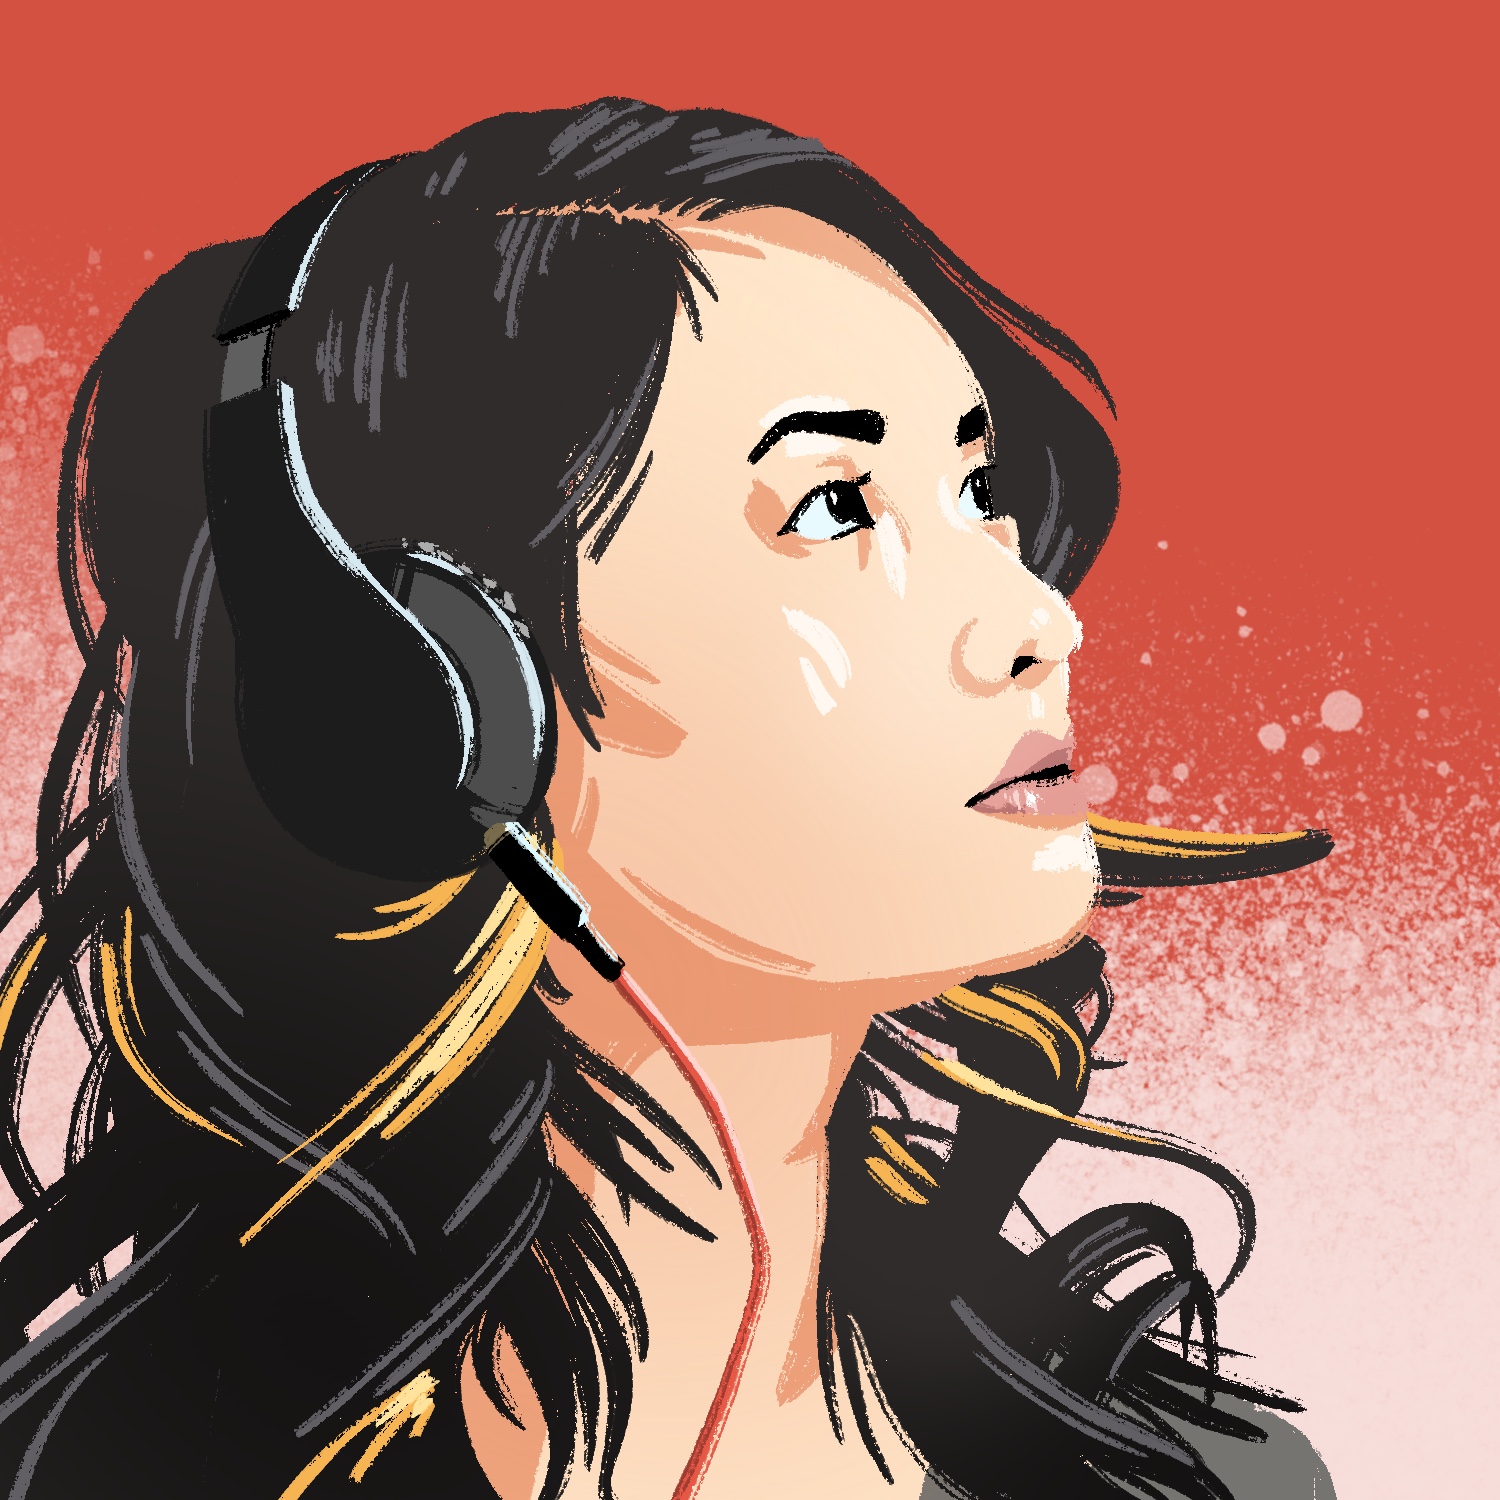 An illustration of a woman looking up and to the right. The woman has a light complexion and dark eyes and hair. She is wearing a gray top and has large, closed headphones on her ears. There is a red cord coming off of the earcup nearest the view, which falls off the bottom of the image. The woman's hair has a few blond highlights in it, and it is curly and wavy around the bottom as it gets near her shoulders. The background is a splotchy red fading downward to light pink.